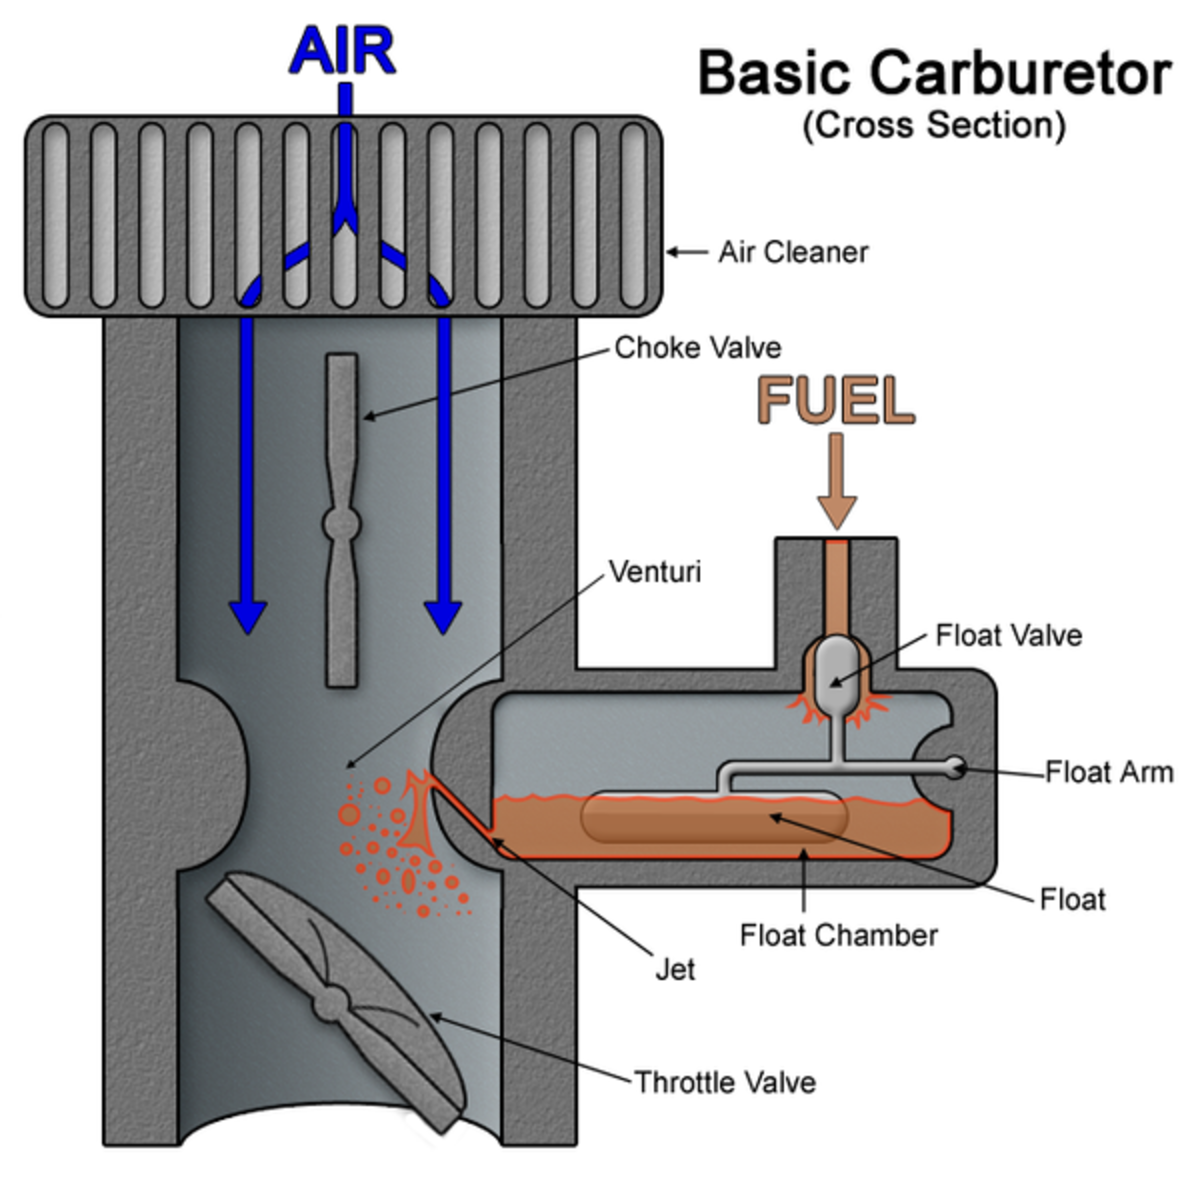 A carburetor filters air and mixes it with fuel, forming a fine mist which gets sucked into the engine.